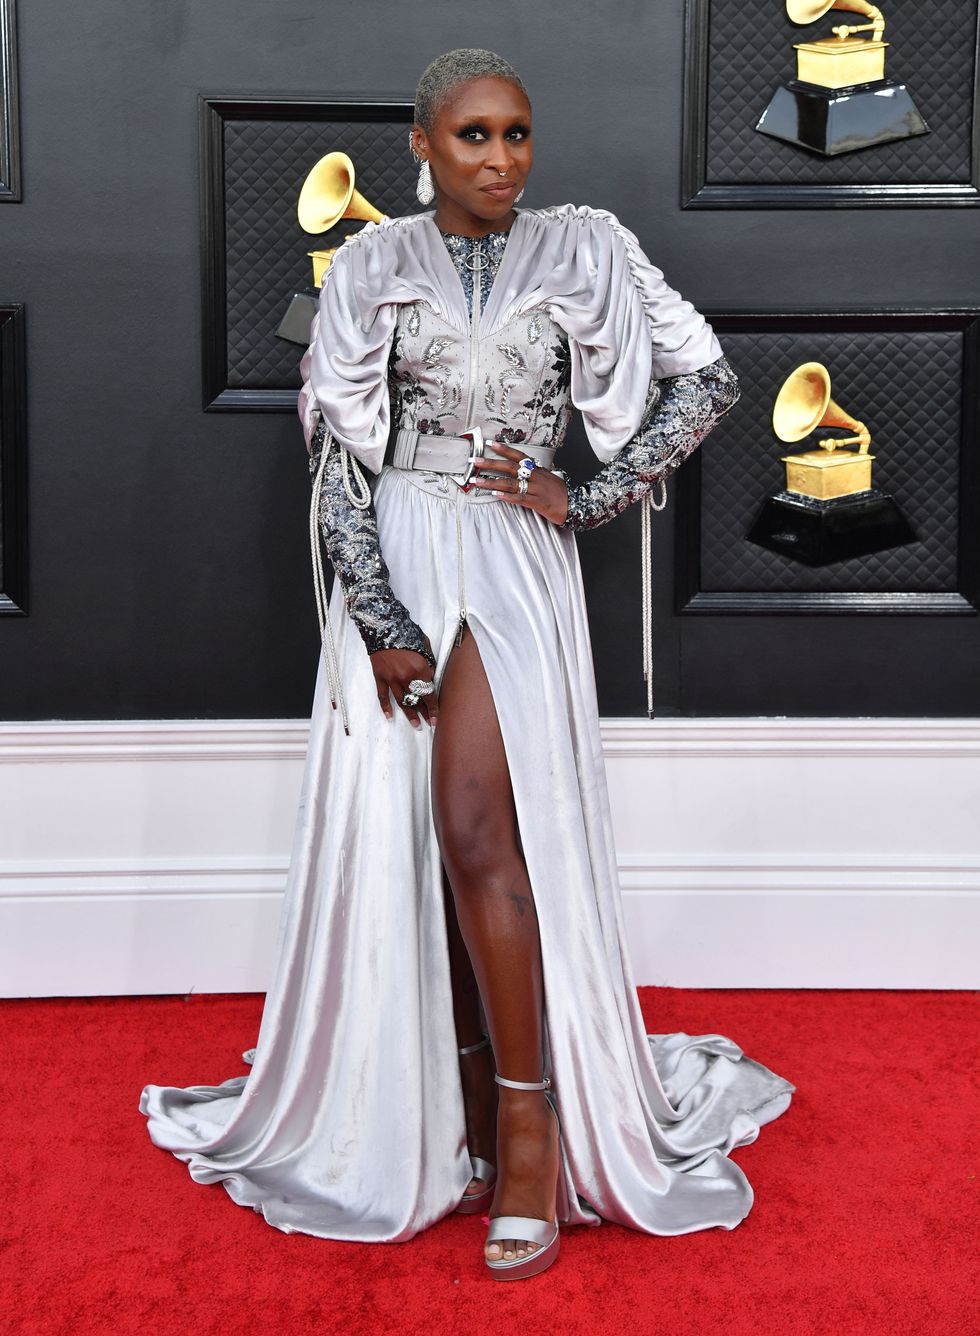 Grammys red carpet 2022: Live updates of the celebrity looks